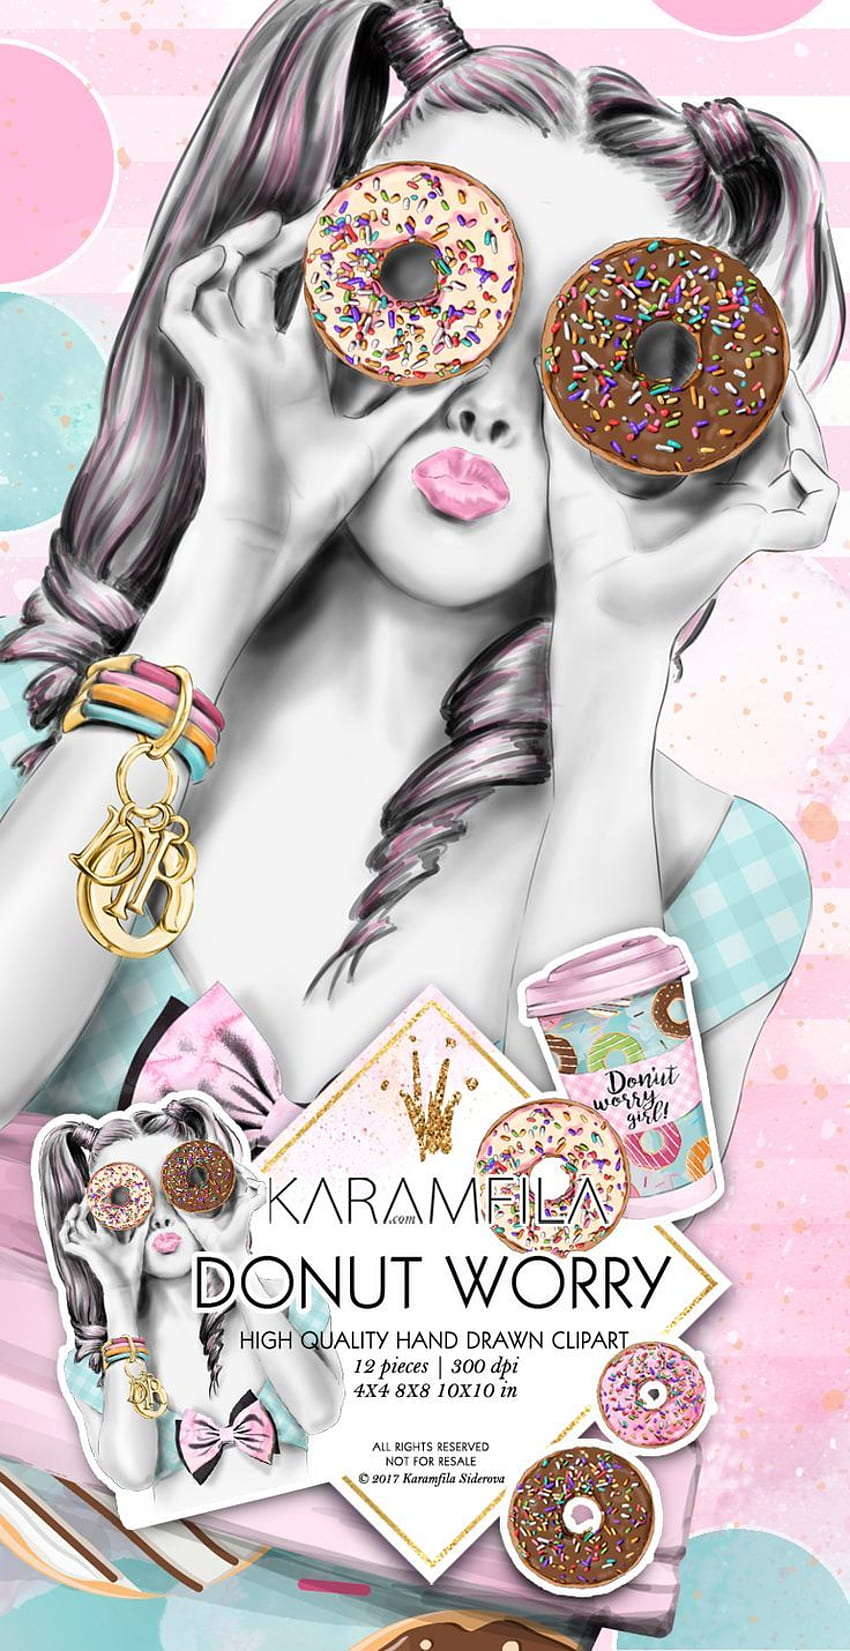 Donuts and Coffee Clipart Takeaway Cup Watercolour Fashion Illustrations Donut Worry Be Happy Girl Boss Life Business Planner อุปกรณ์ DIY - วอลล์เปเปอร์โทรศัพท์ HD